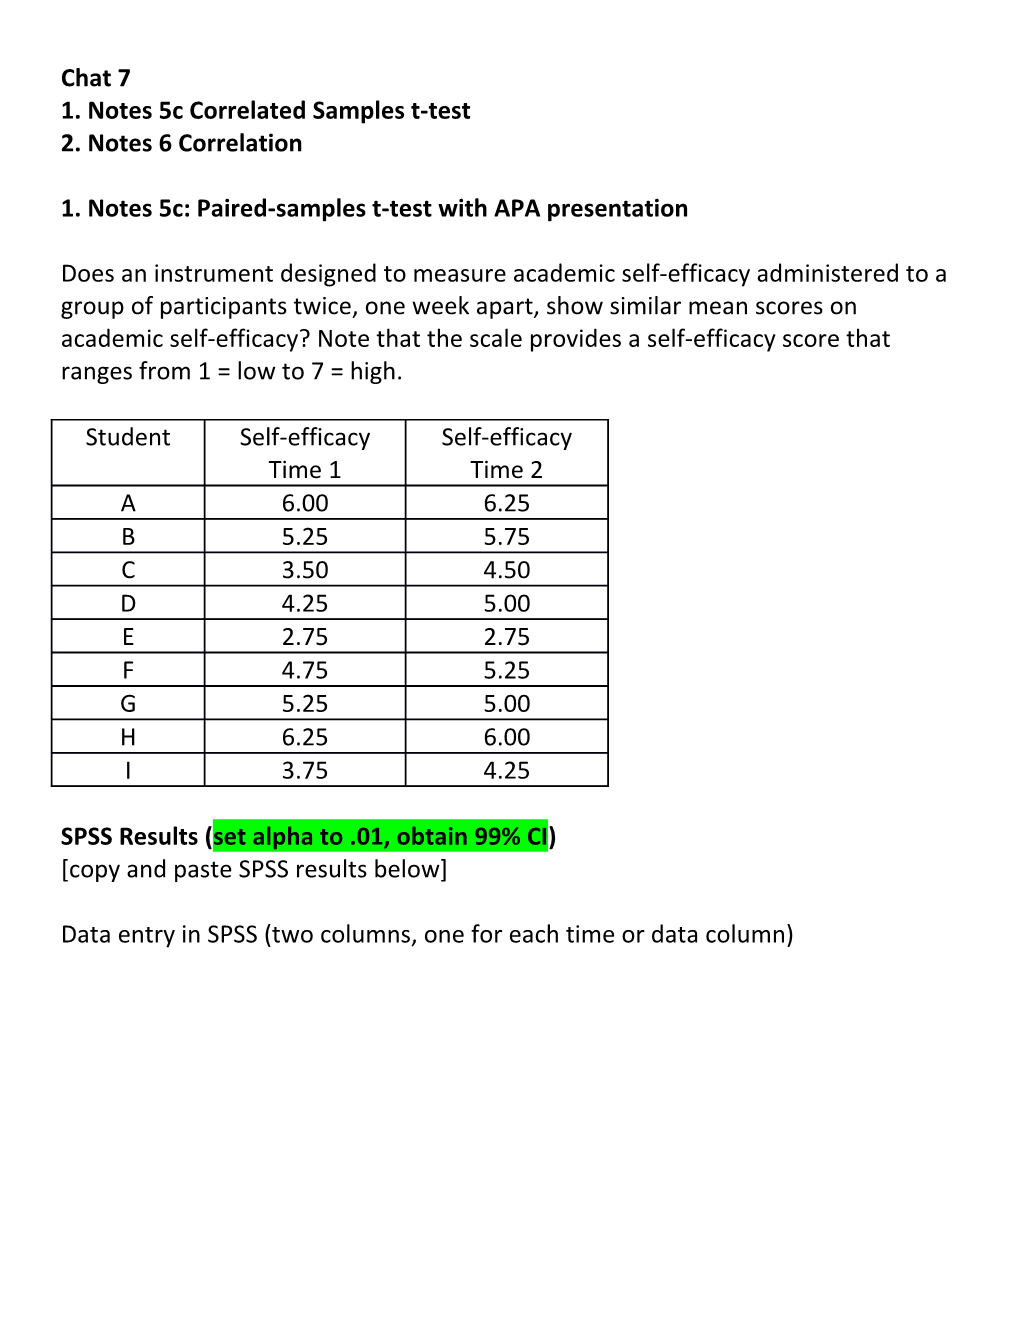 1. Notes 5C: Paired-Samples T-Test with APA Presentation